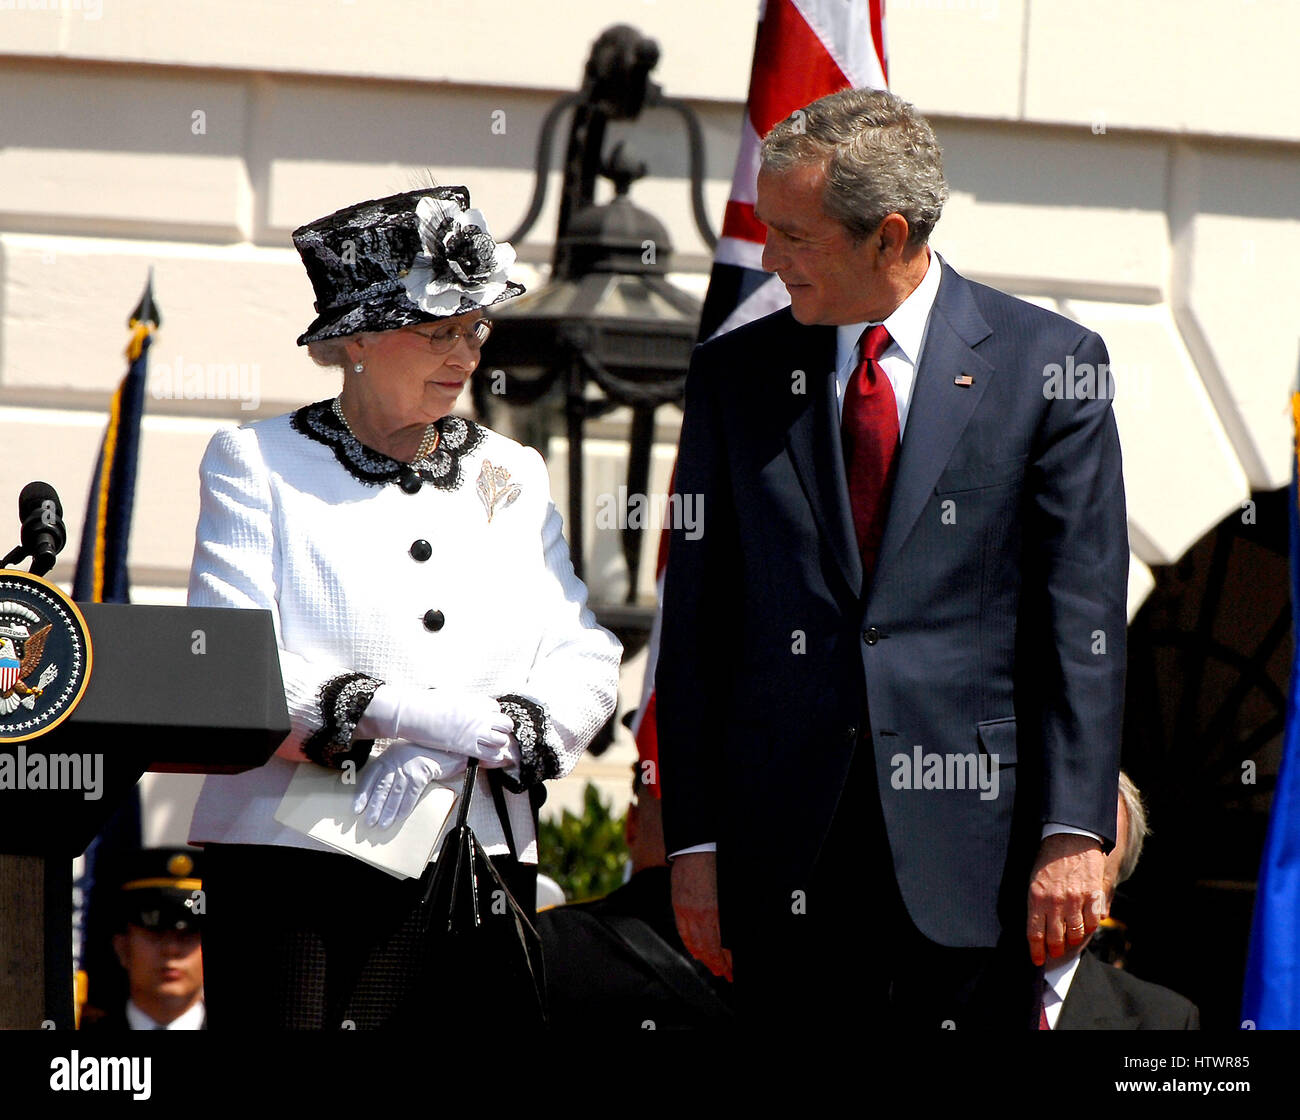 Washington, D.C - May 7, 2007 -- Her Majesty Queen Elizabeth II makes remarks as she and His Royal Highness The Prince Philip, Duke of Edinburgh of Great Britain are welcomed by United States President George W Bush and first lady Laura Bush during a Sout Stock Photo